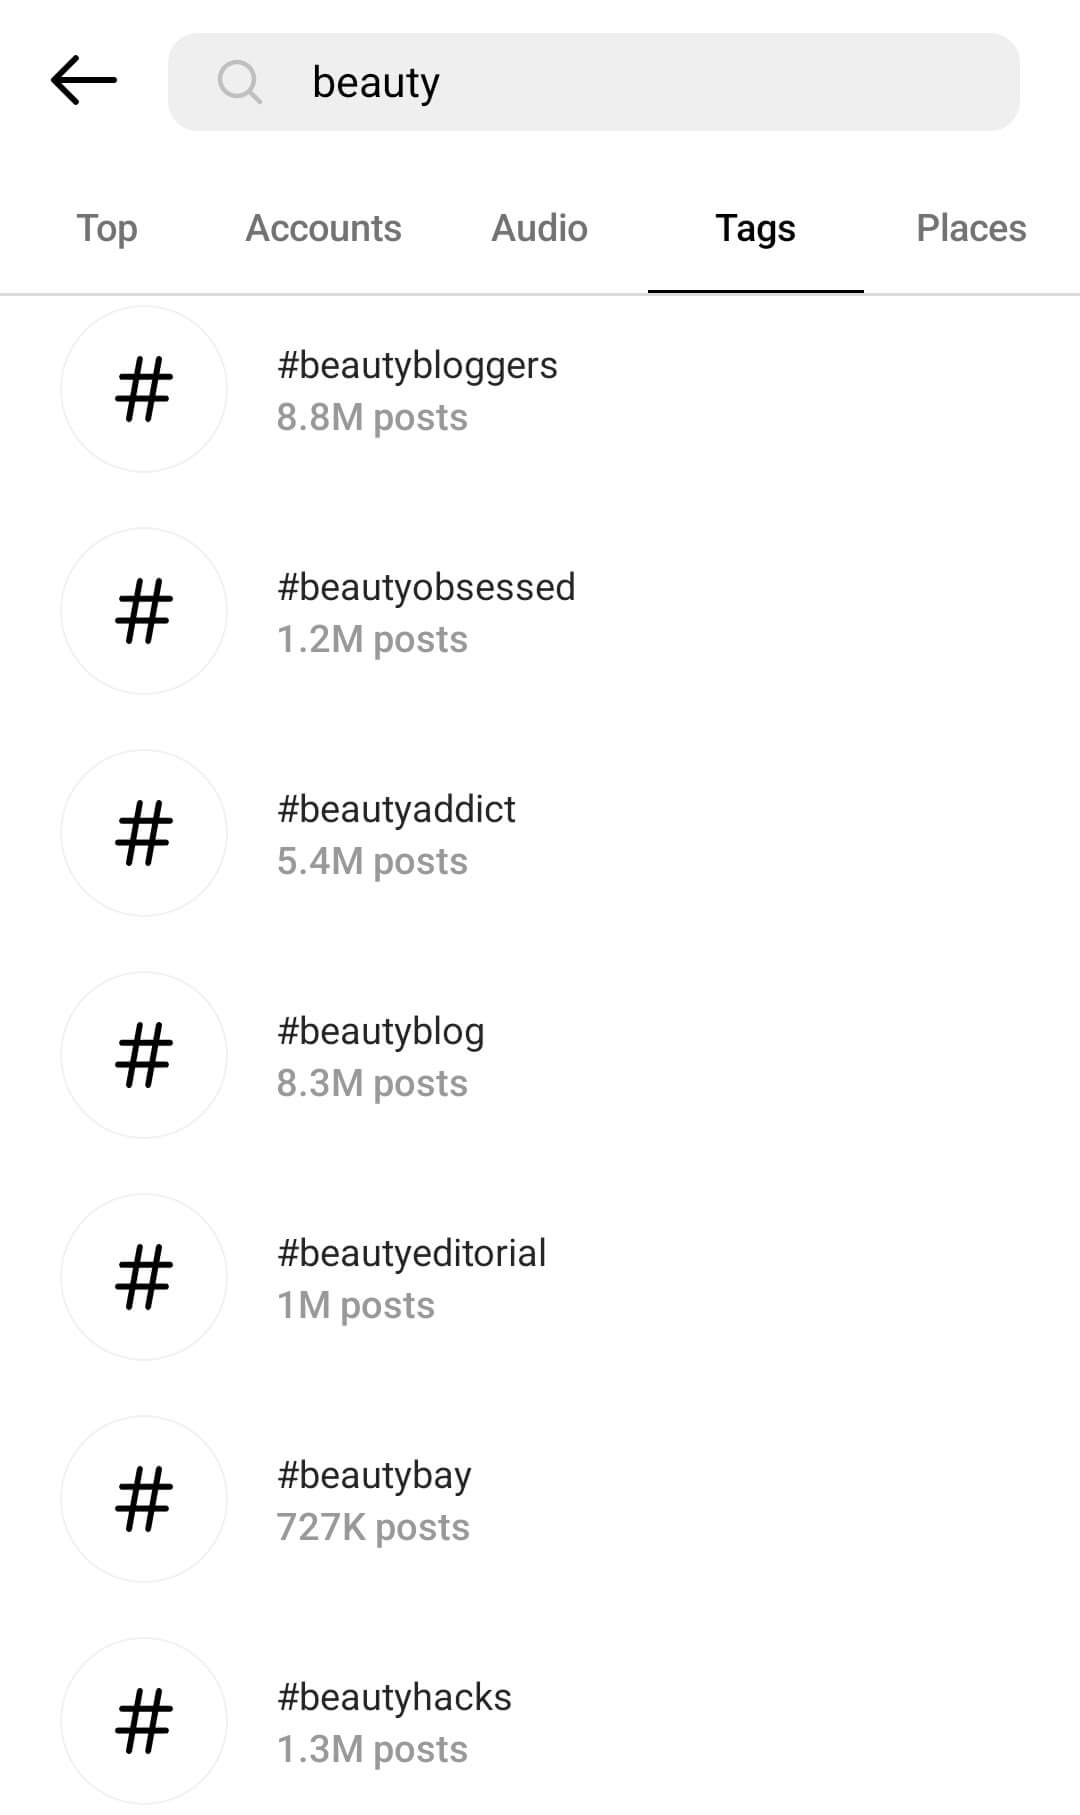 how-to-find-partner-micro-influencers-on-instagram-browse-influencer-hashtags-beauty-example-2